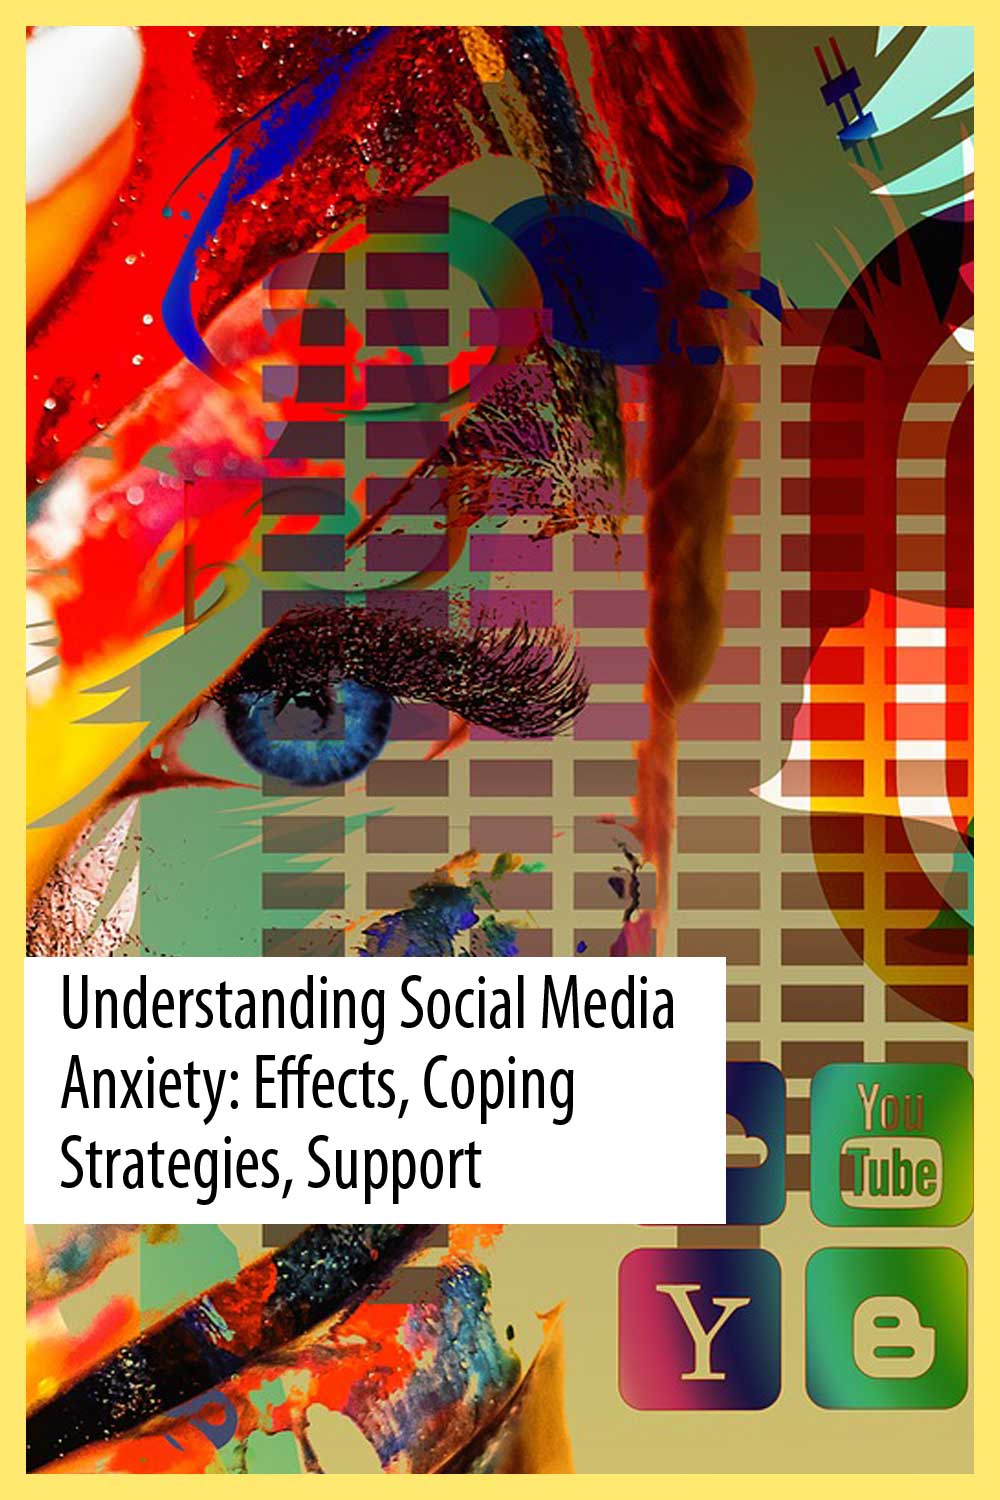 Understanding Social Media Anxiety: Effects, Coping Strategies, and Support